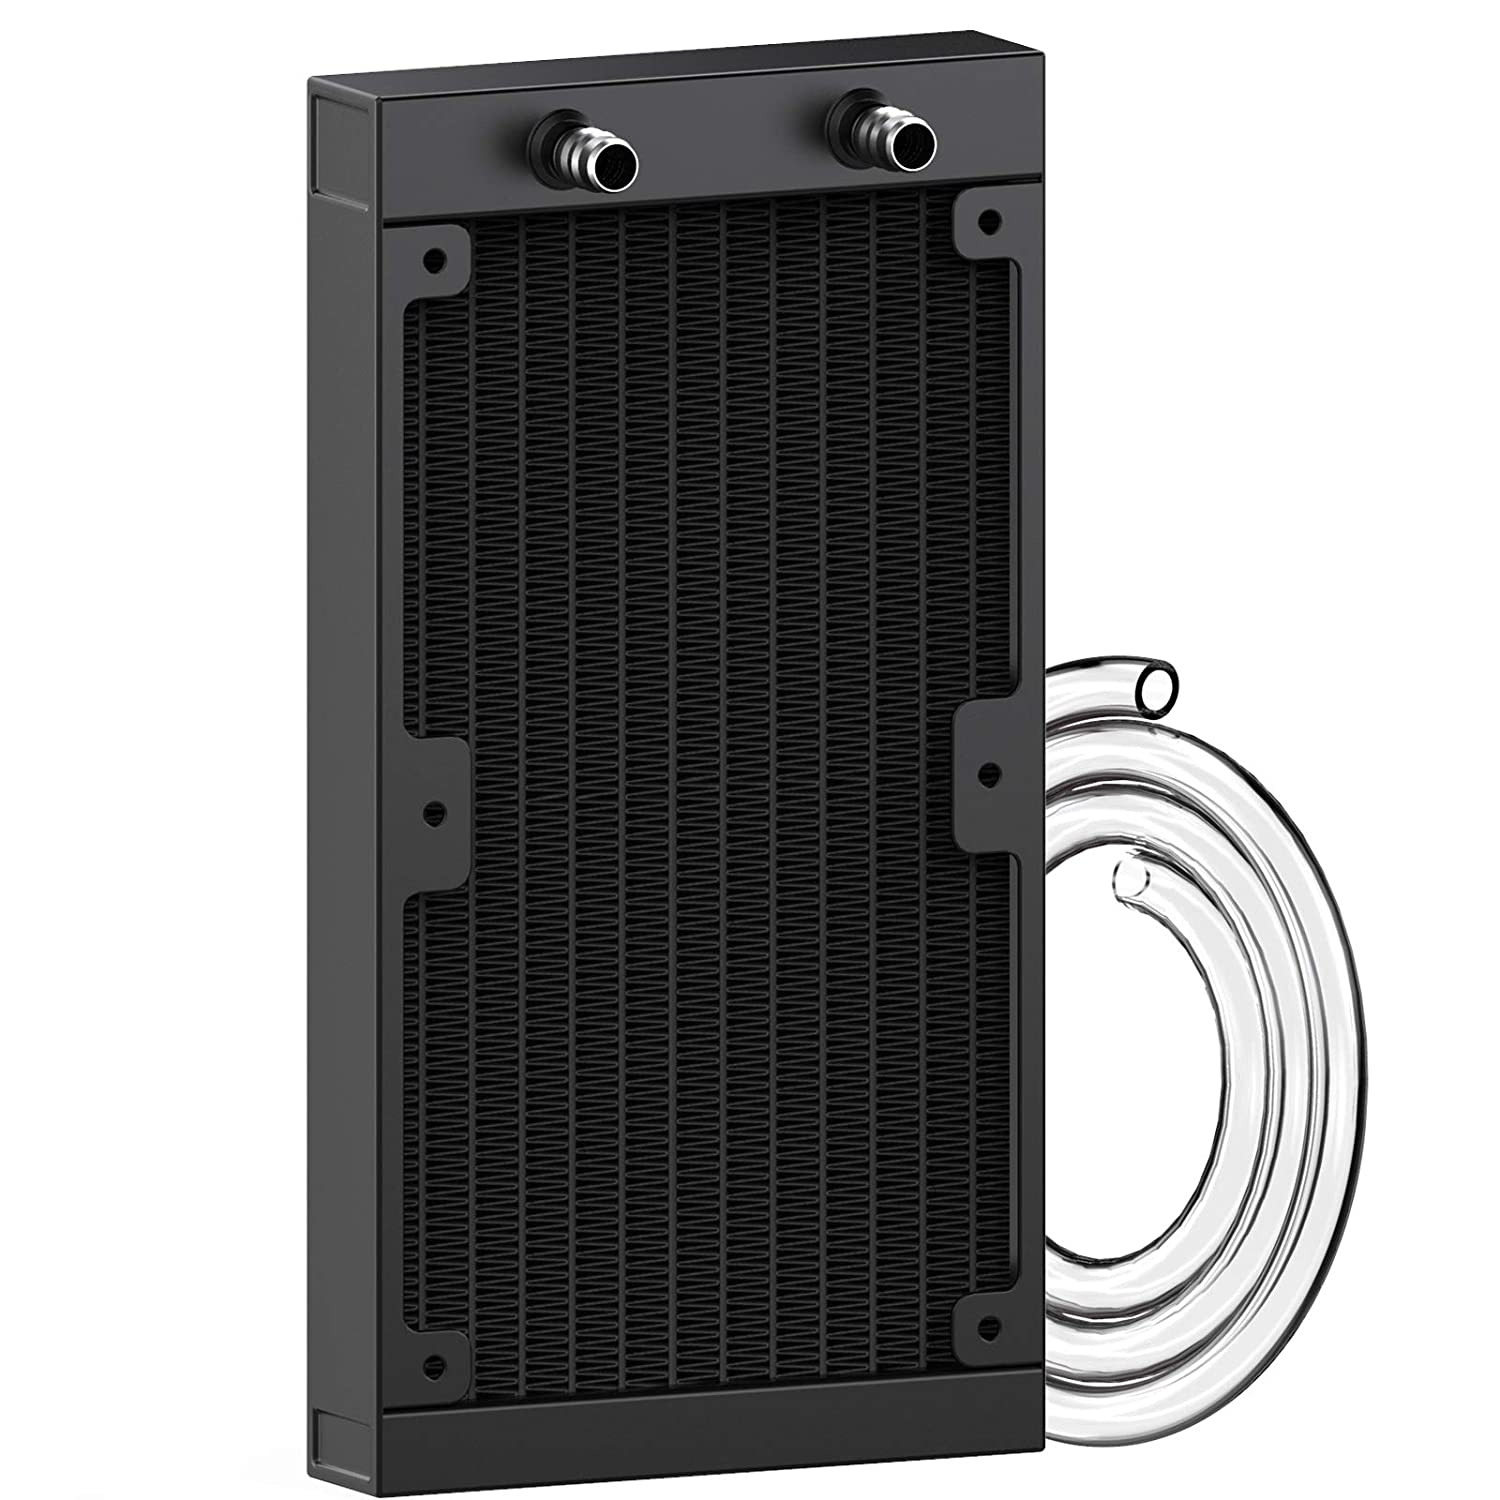 Water Cooling Radiator, 12 Pipe Aluminum Heat Exchanger Radiator with Tube for P